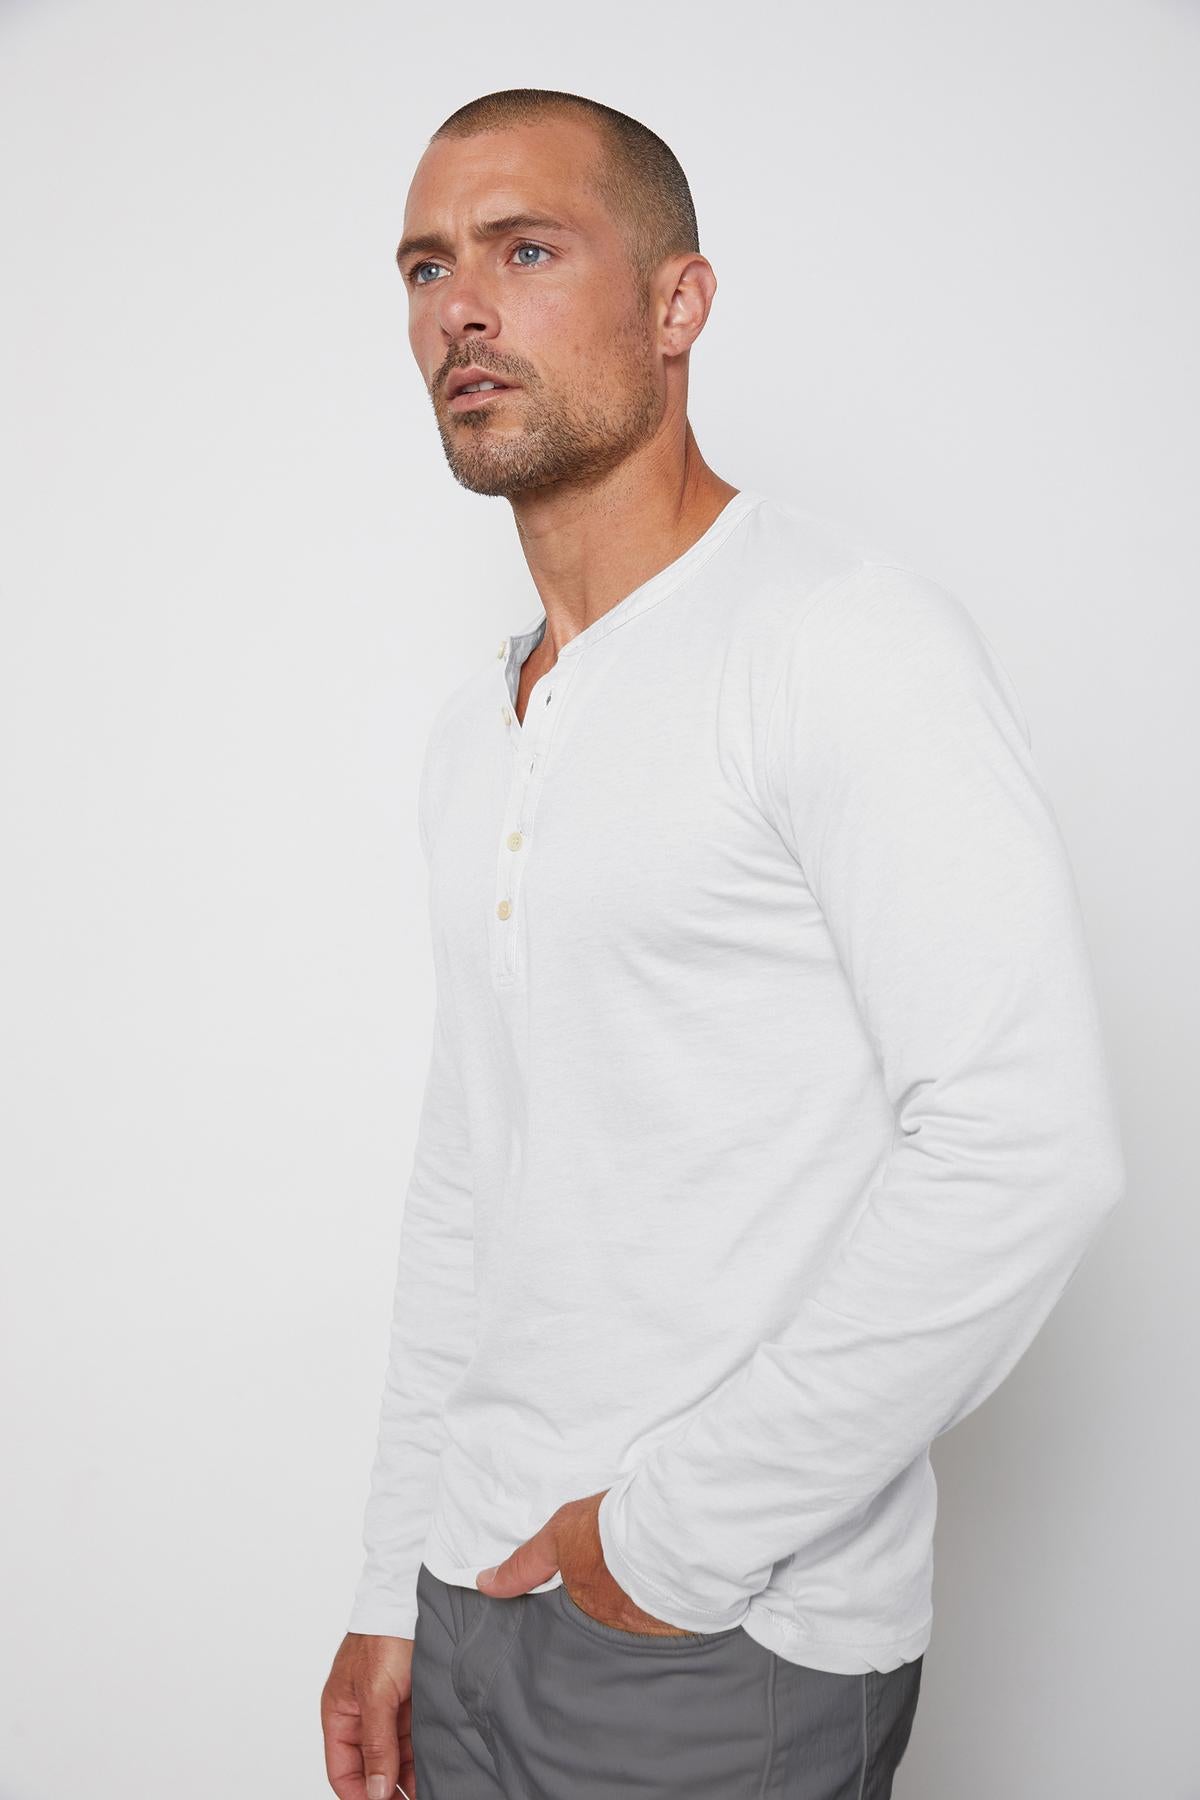 A man with a shaved head and a short beard wears a white long-sleeve ALVARO HENLEY by Velvet by Graham & Spencer and gray pants, standing against a plain white background.-36273890328769